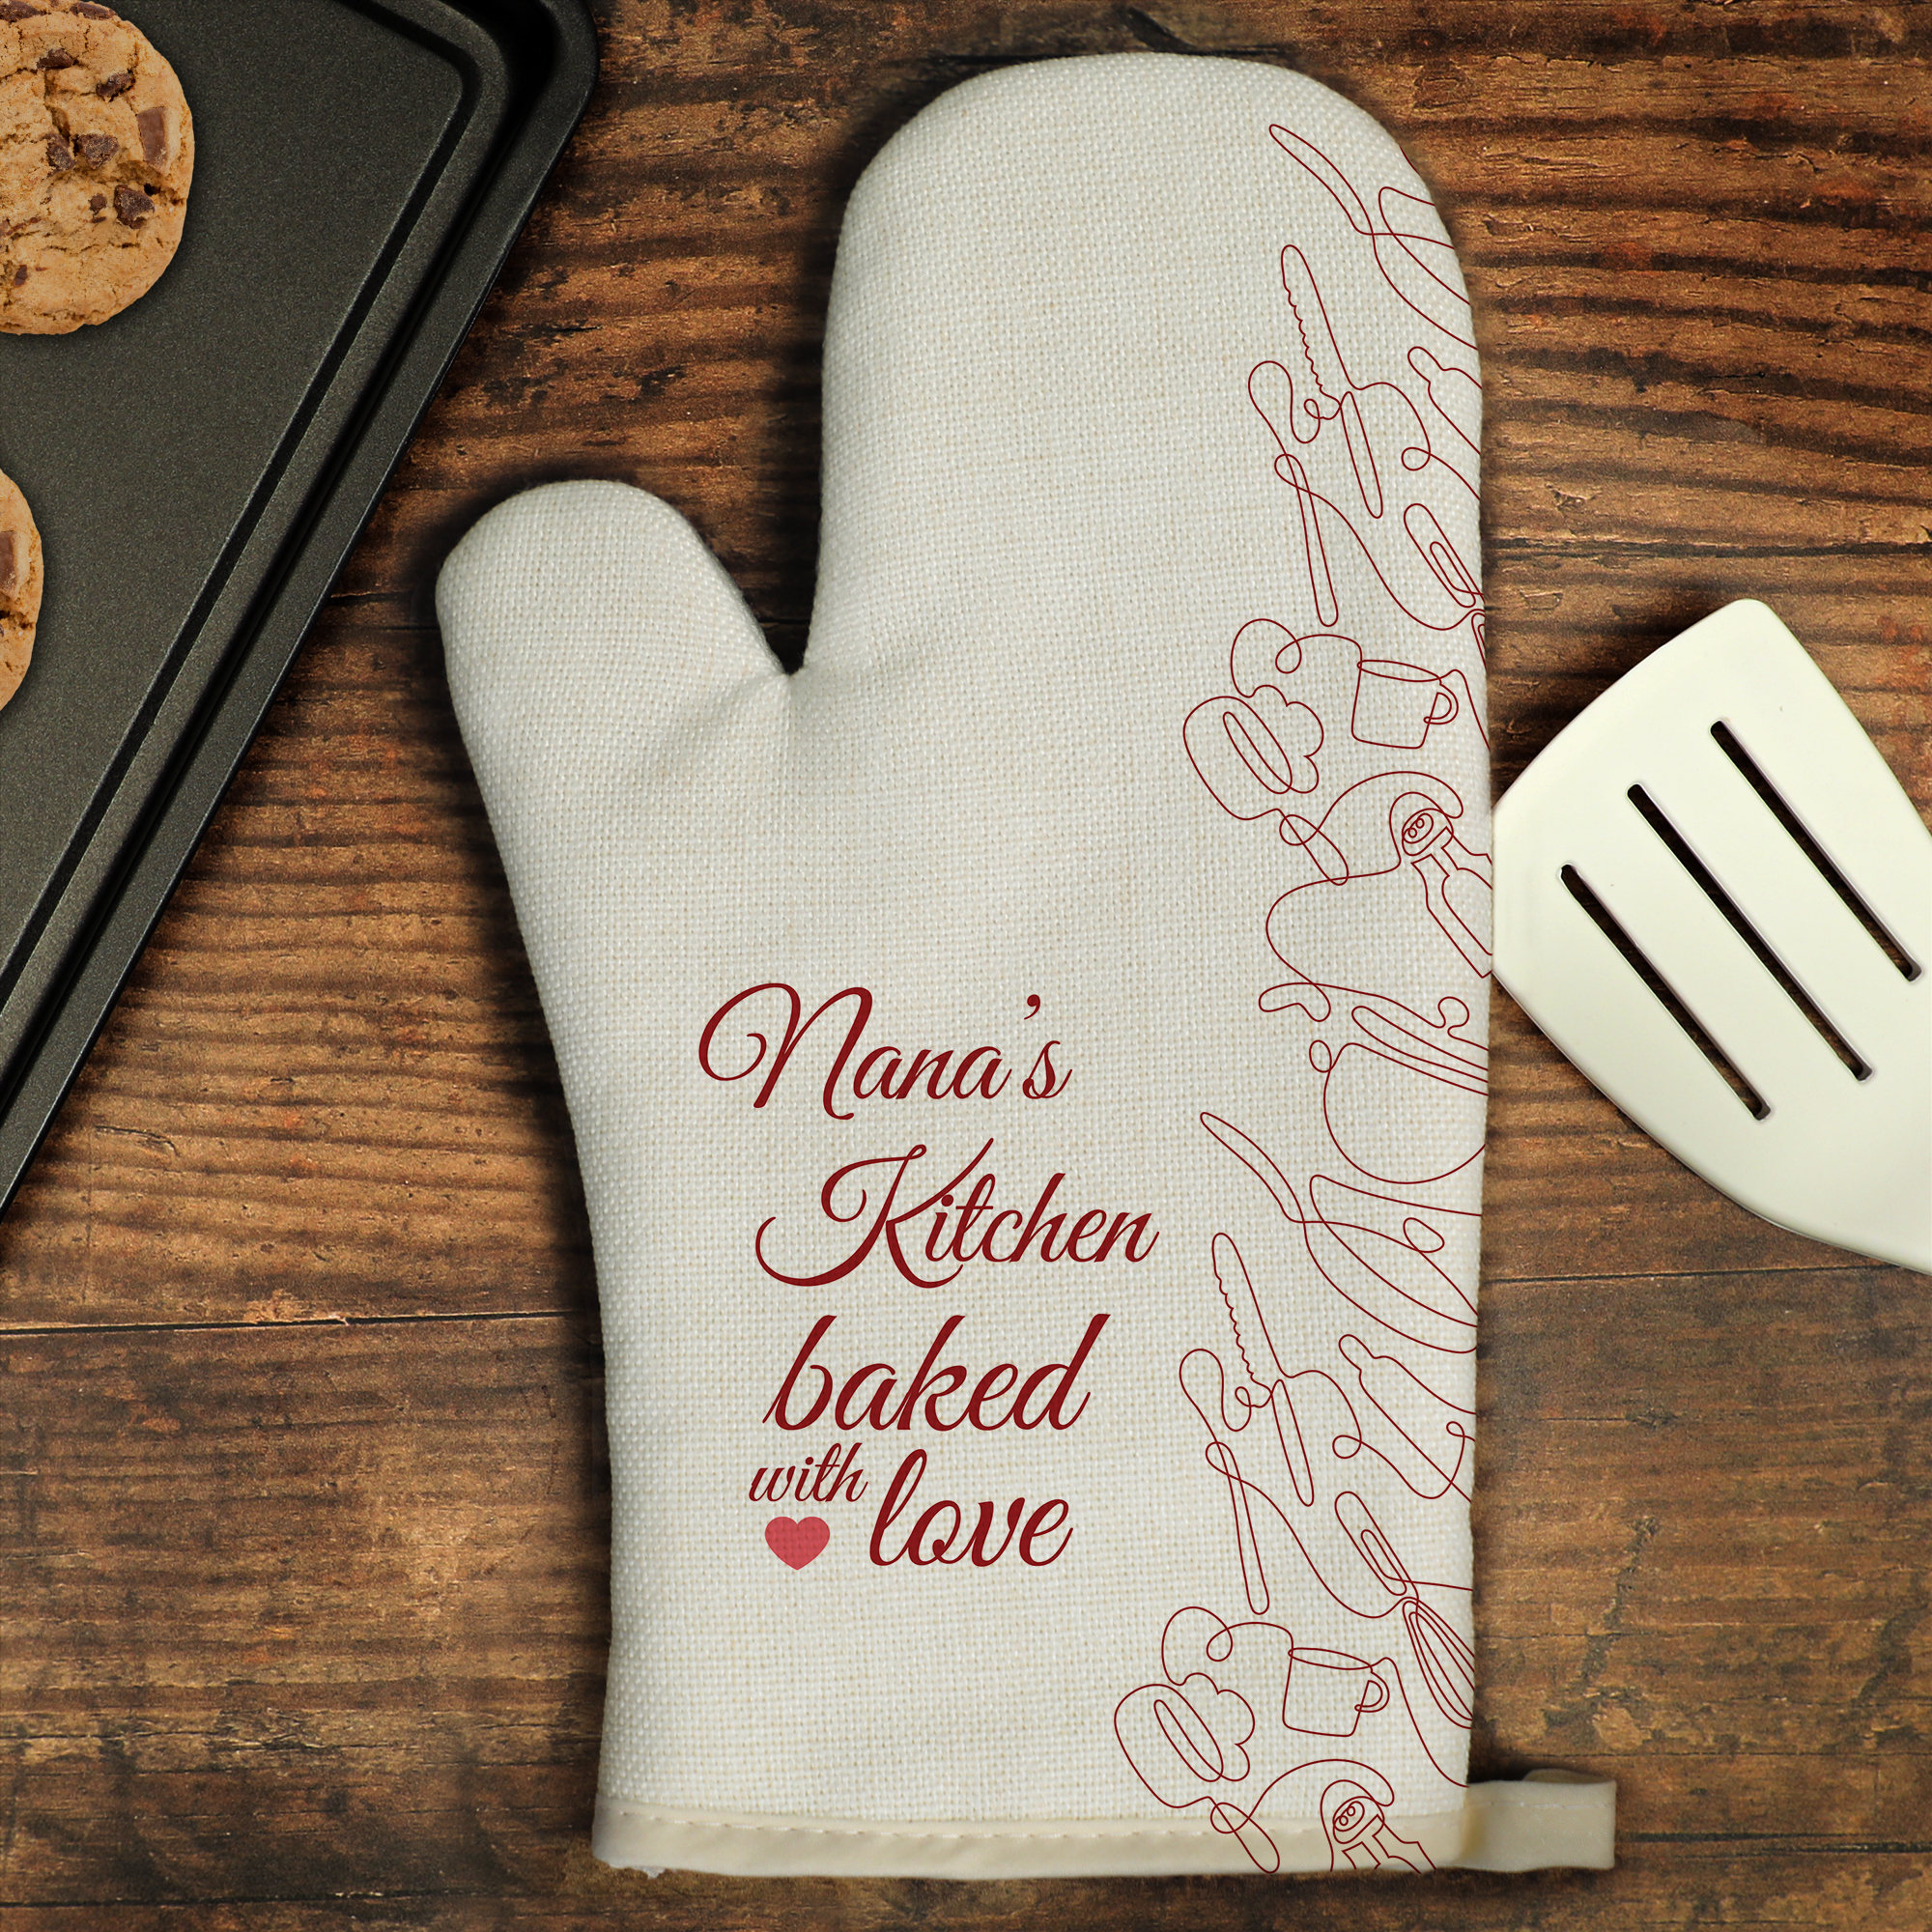 Personalized Oven Mitts and Pot Holders Sets Custom Kitchen Gifts Add Your  Image/Text for Friend,Family as Gift (Personalized Oven Mitts and Pot